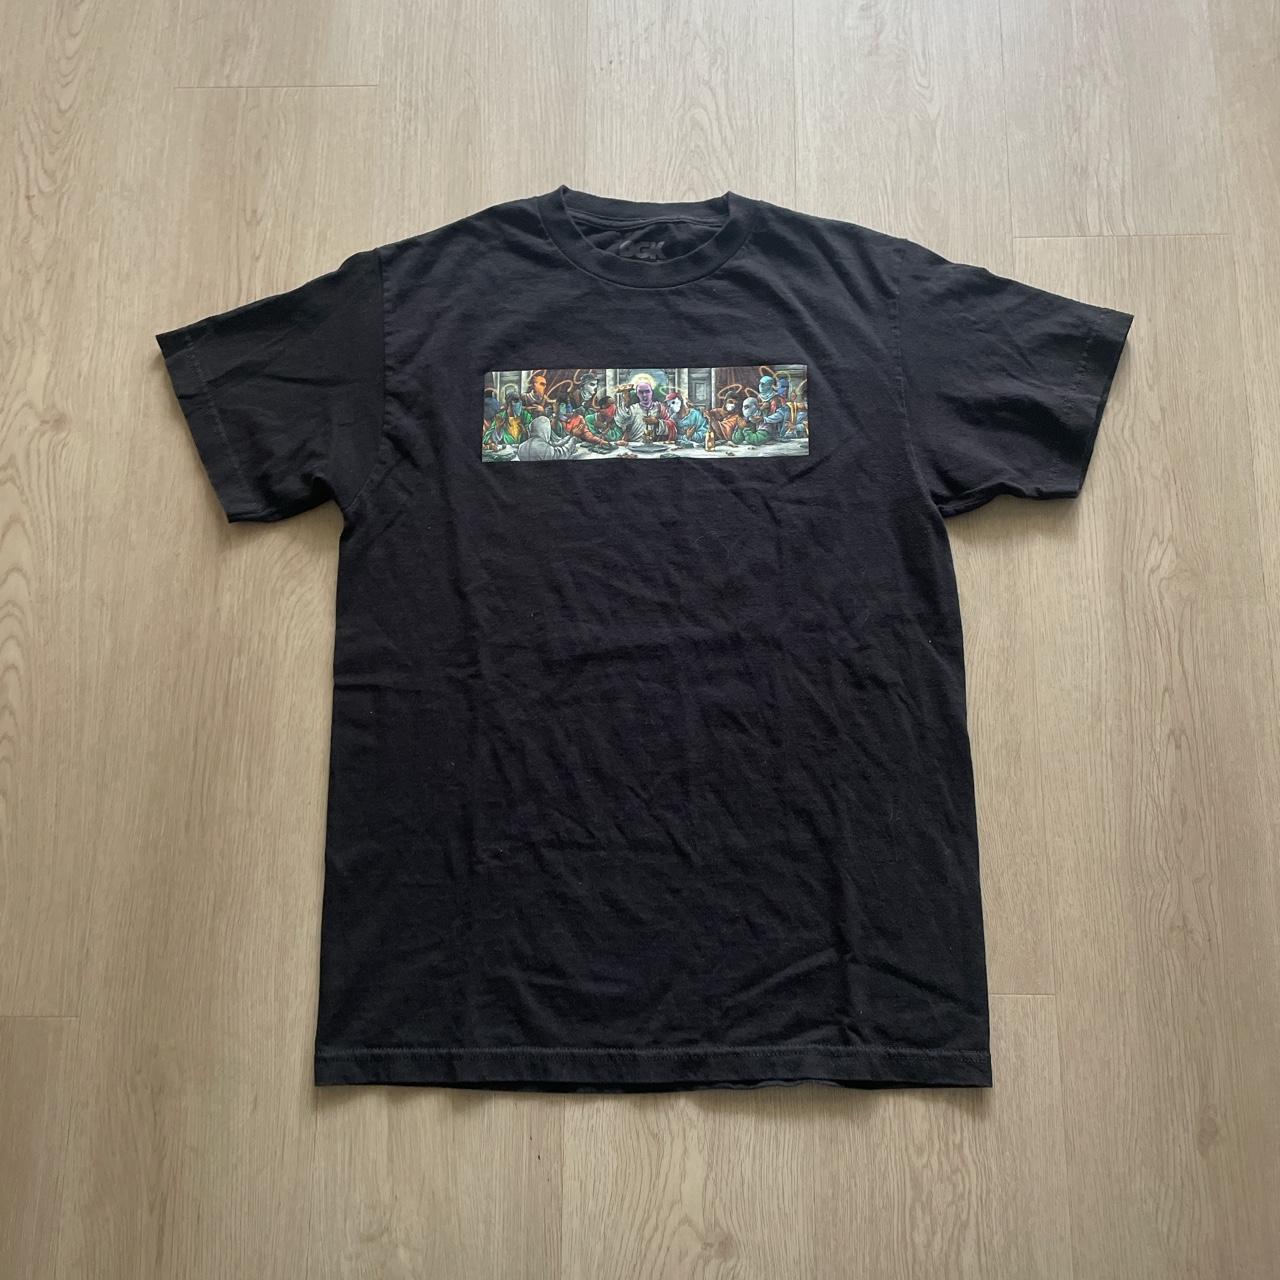 DGK The Last Supper Box Logo tee condition is 8/10,... - Depop